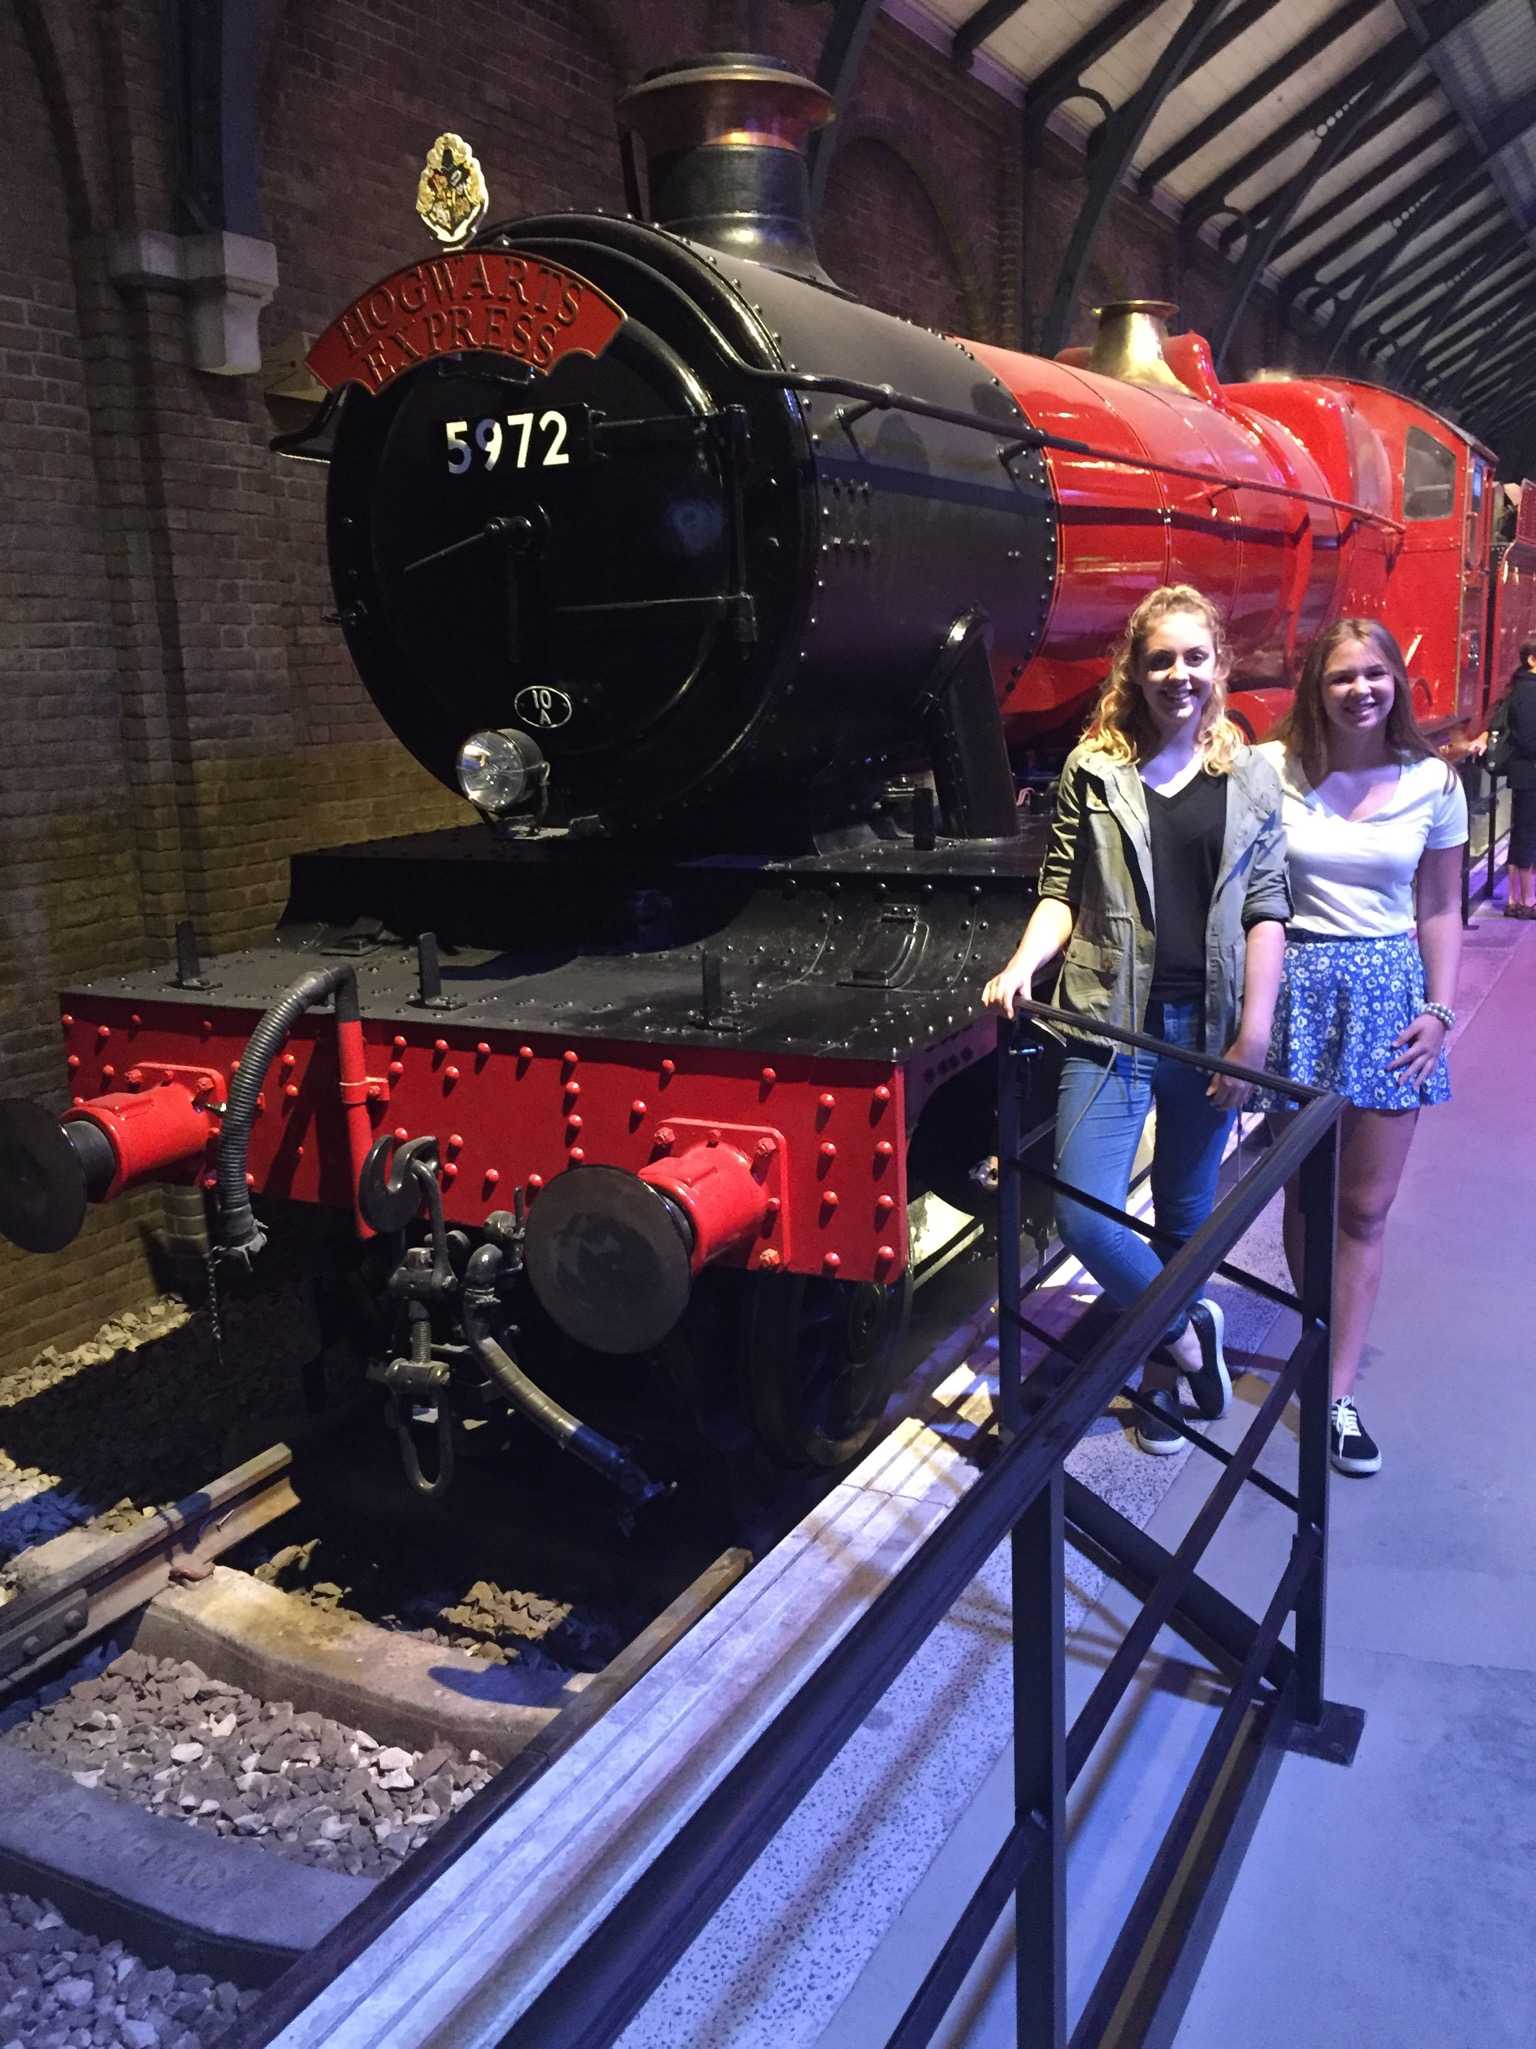 ALL ABOARD: Amy Hopkinson (left) and I decided to see what the hype was all about. Turns out the Hogwarts Express is an actual steam engine train — I thought it ran on magic.